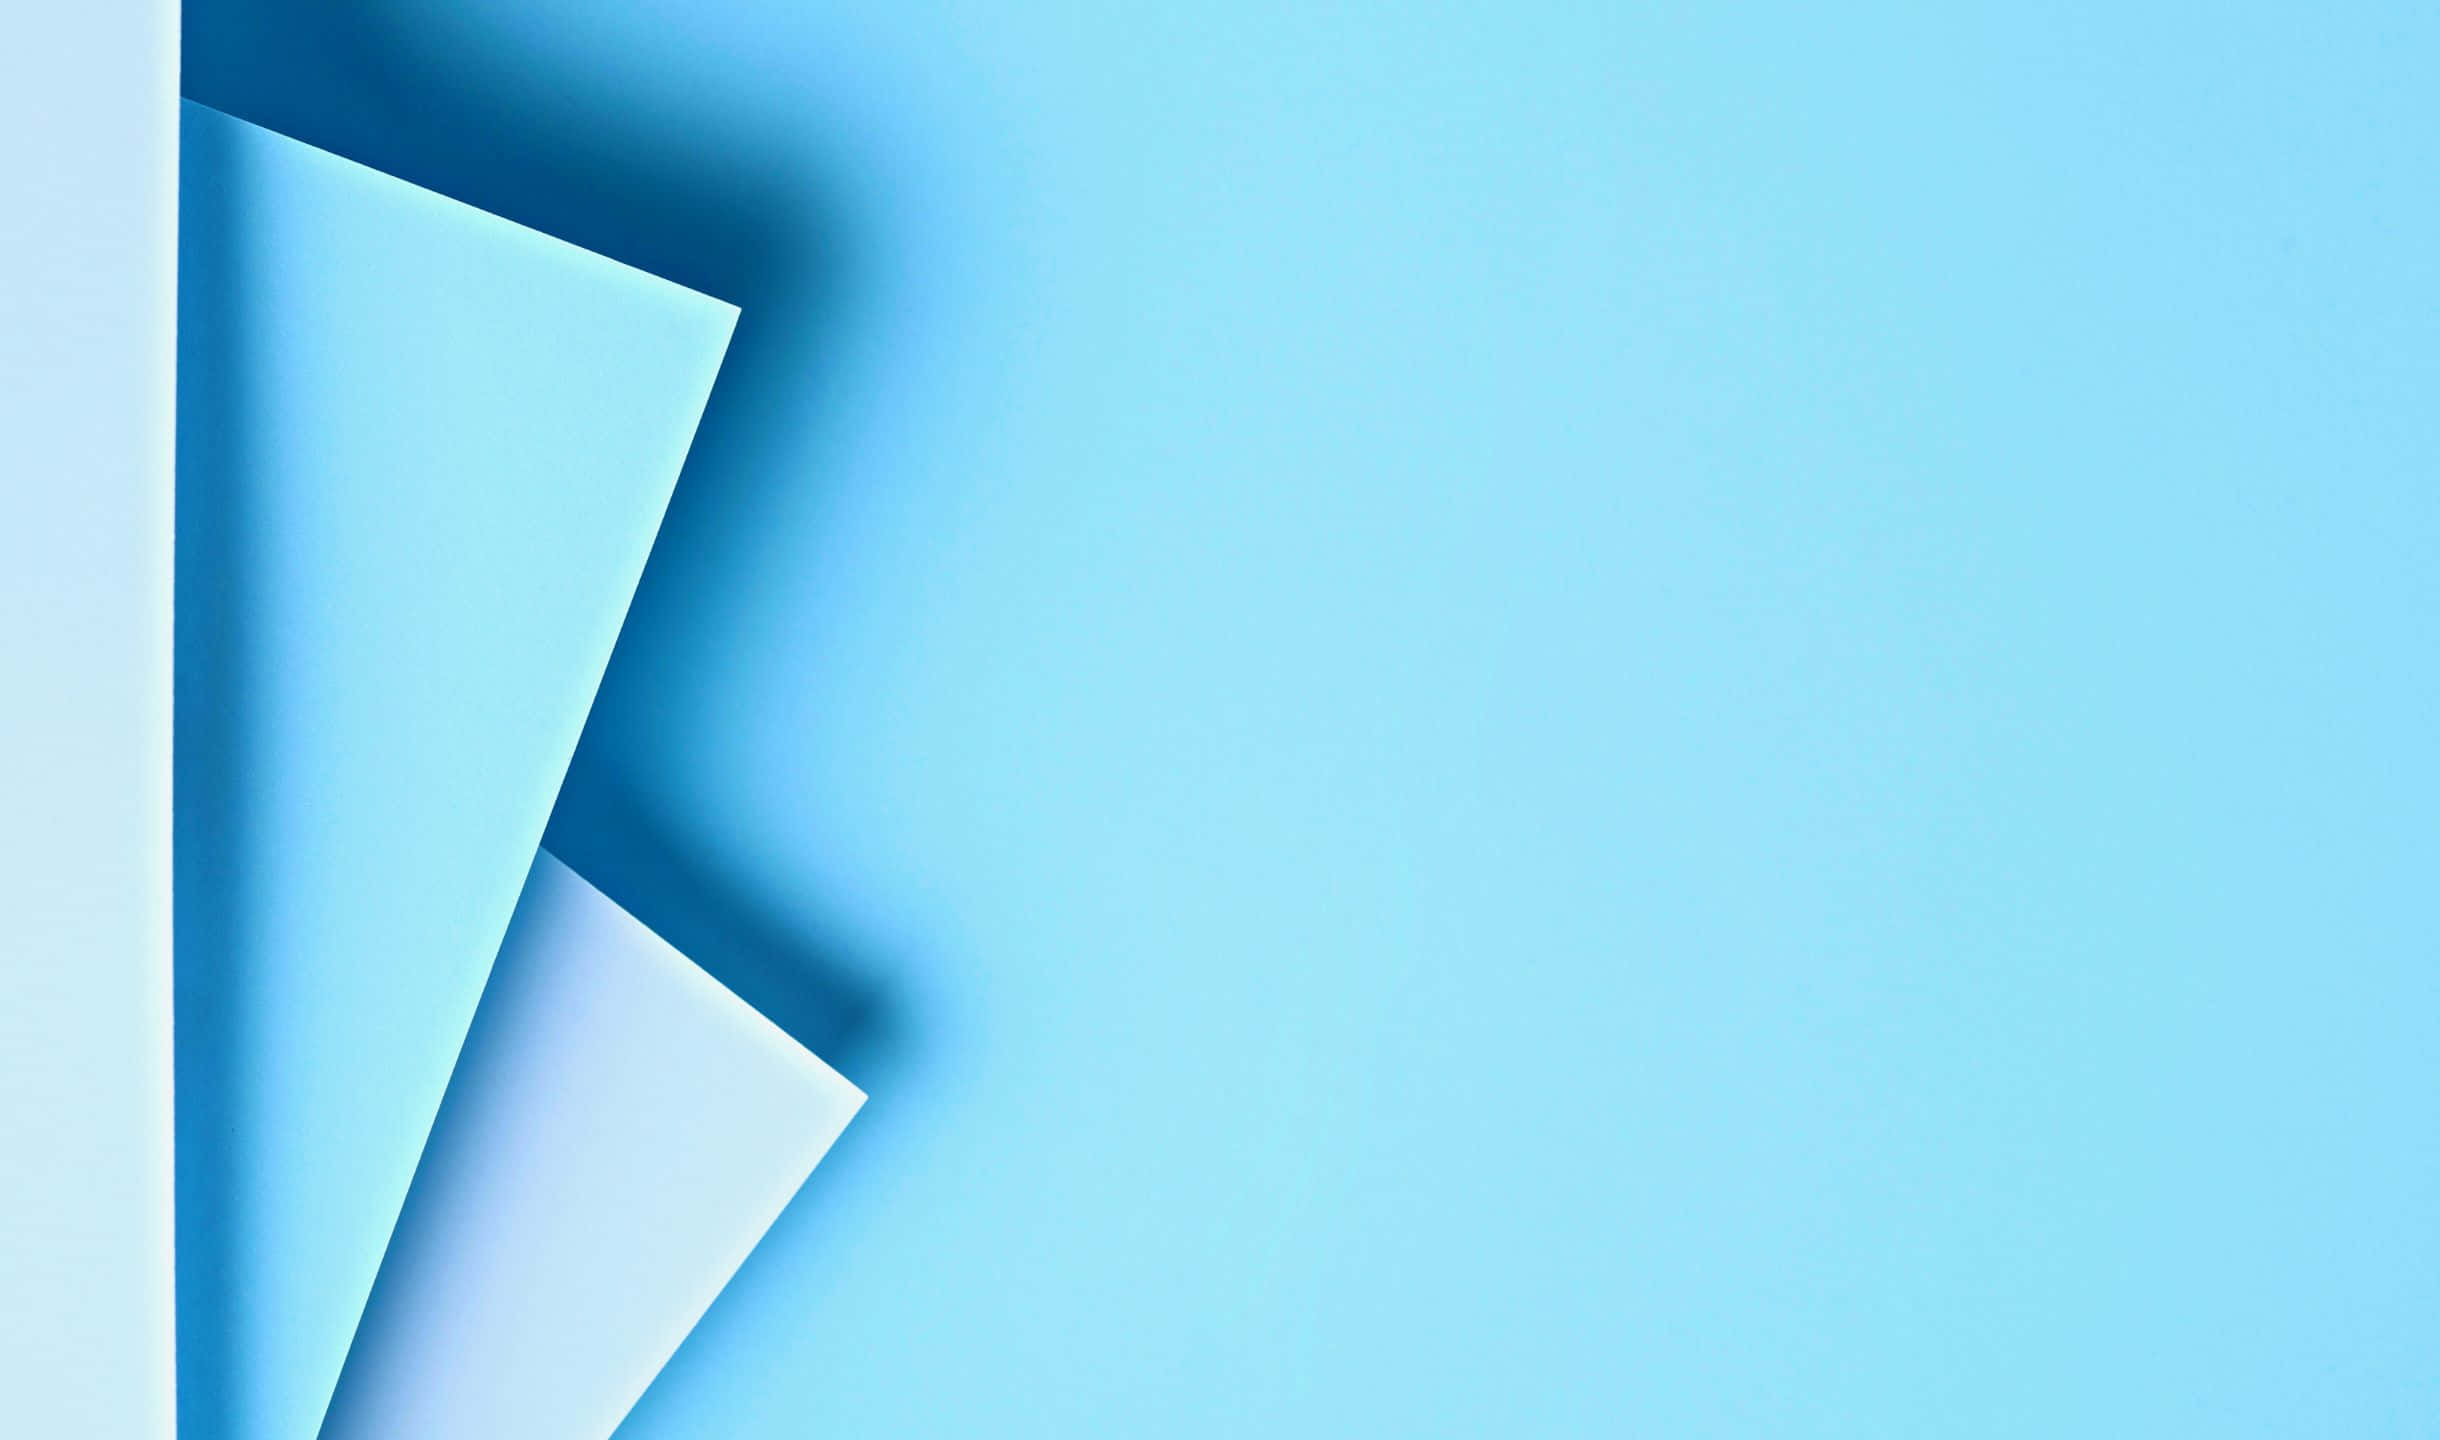 A Blue Paper Folded In Half On A Blue Background